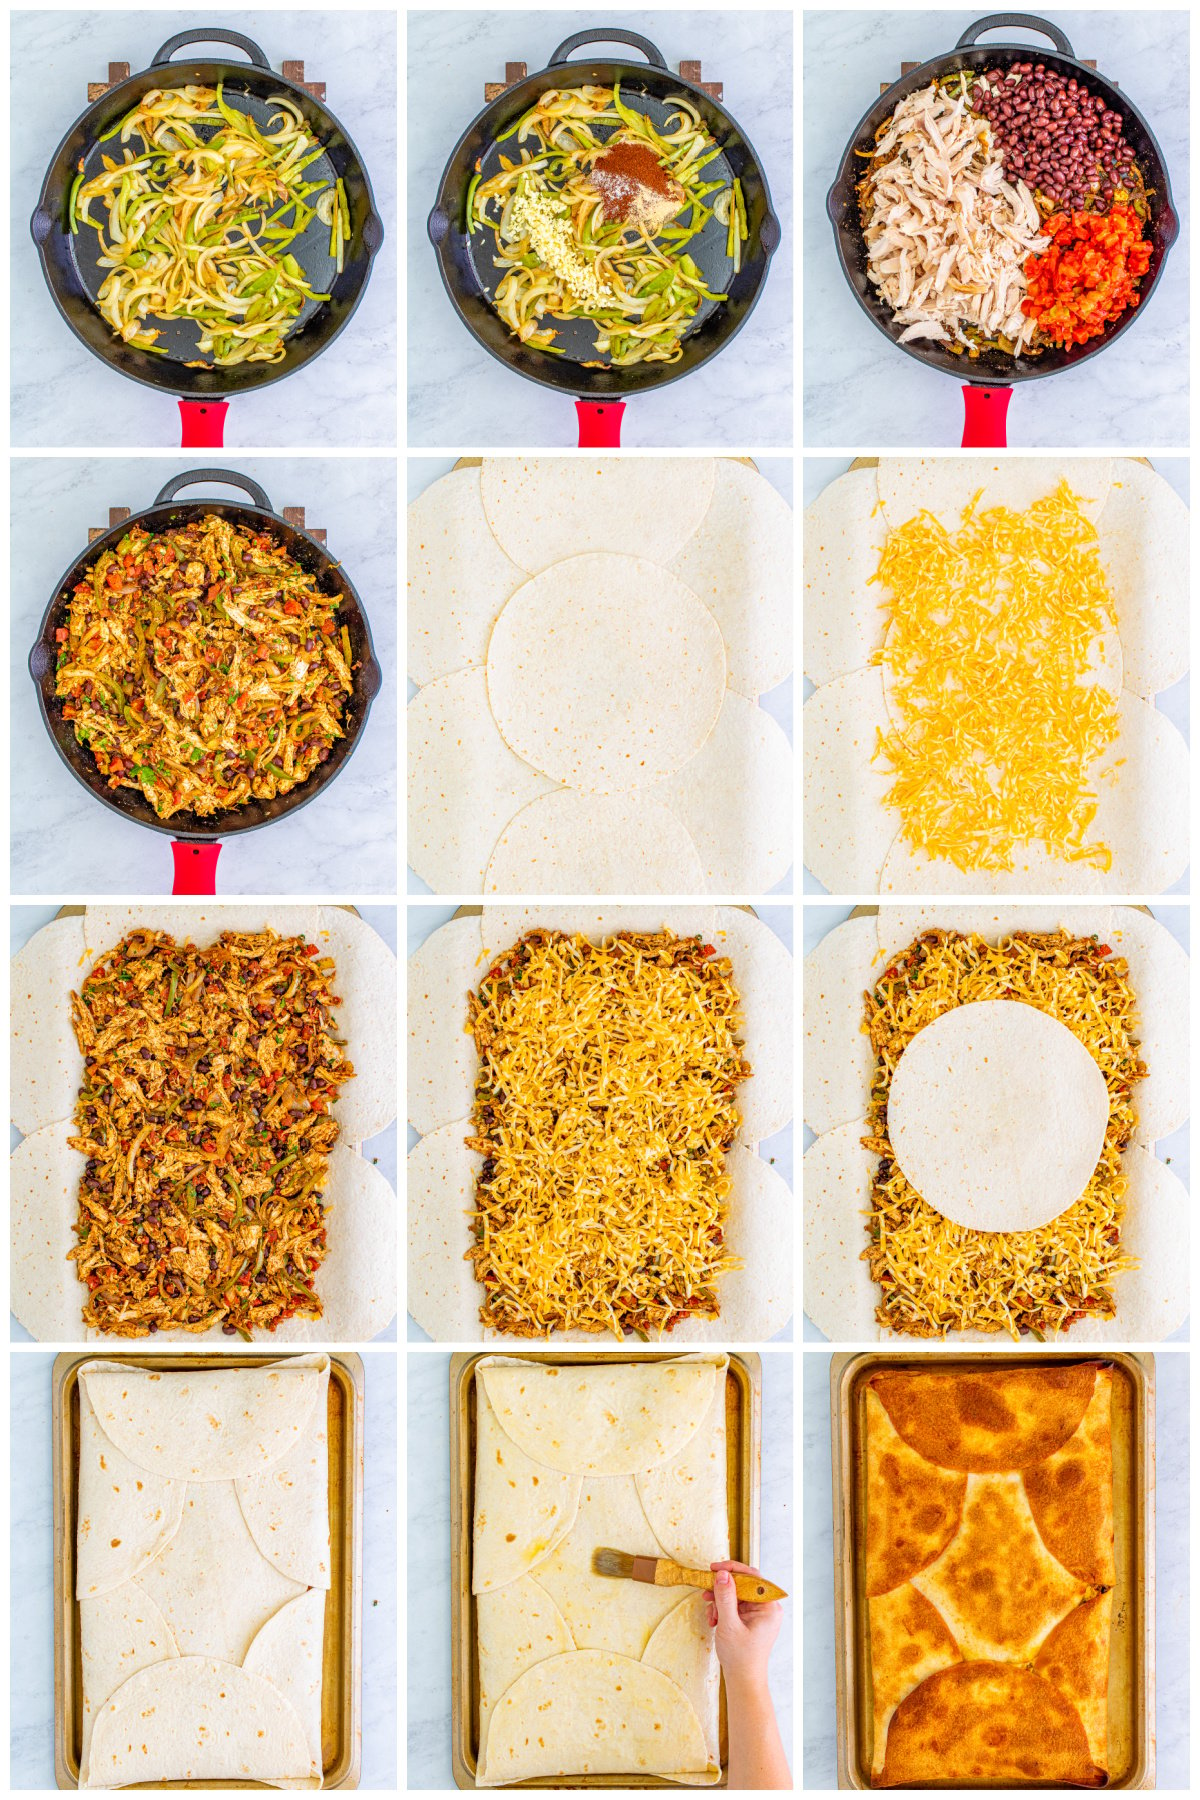 Step by step photos on how to make a Chicken Quesadilla.